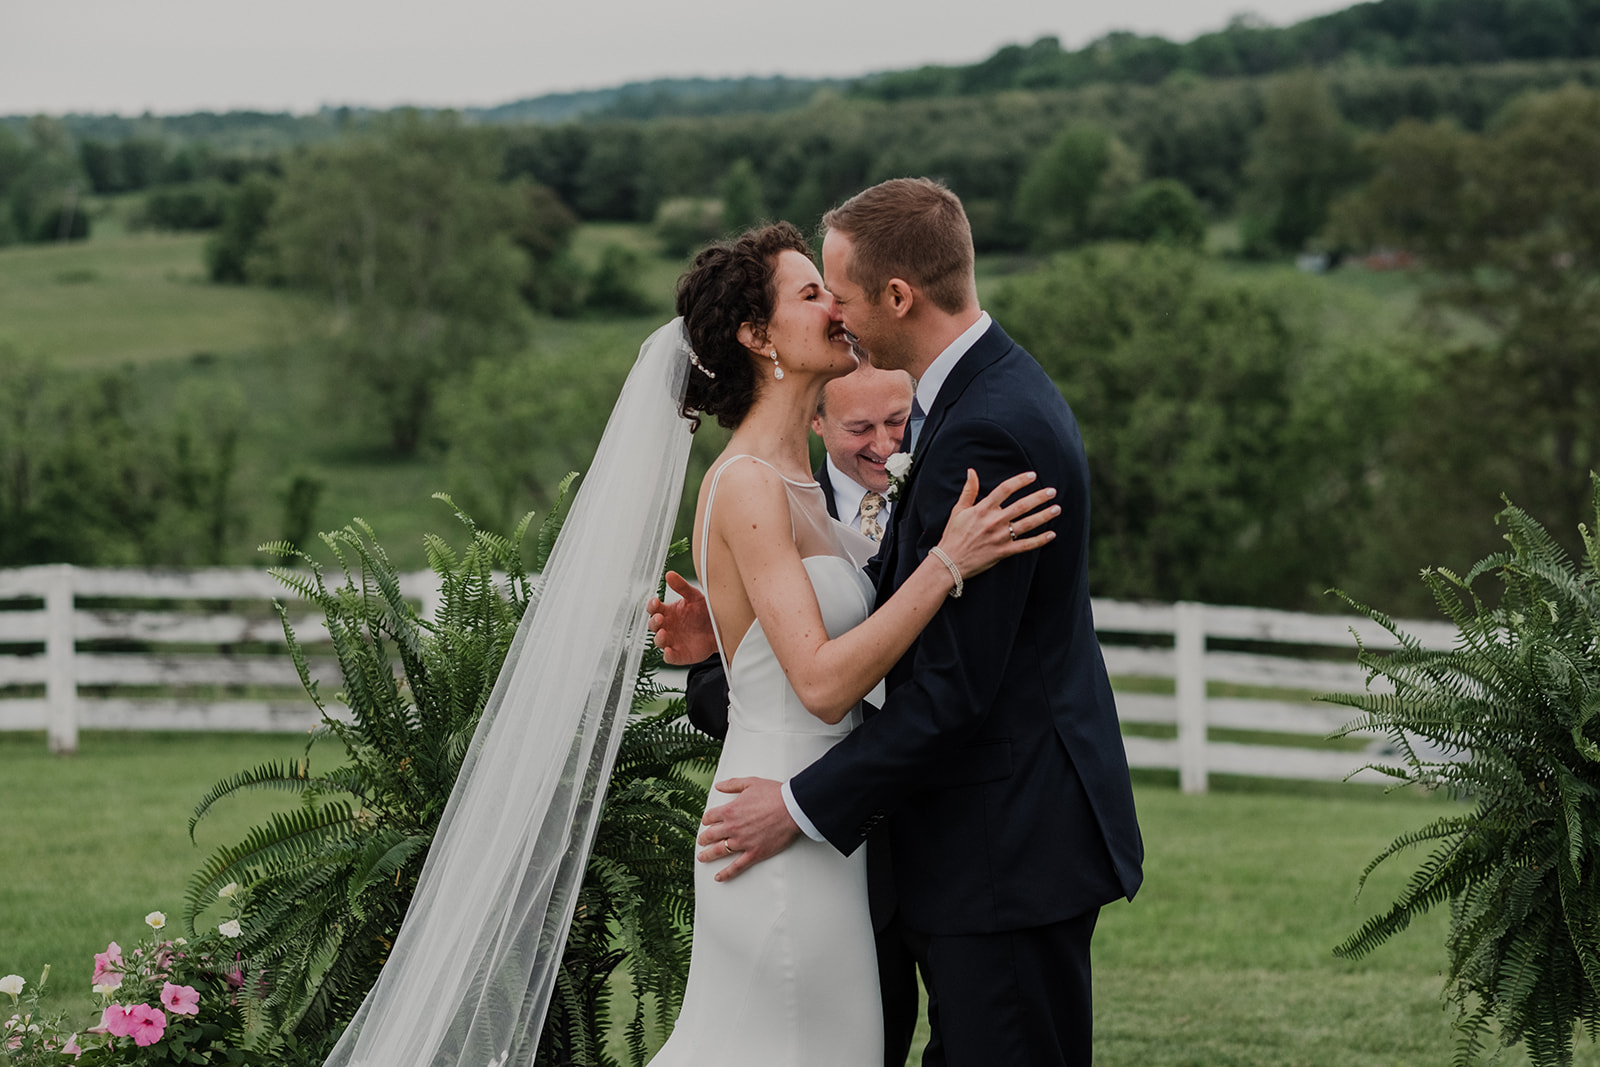 A bride and groom kiss after they are pronounced husband and wife during their outdoor wedding ceremony at Blue Hill Farm in Waterford, VA.